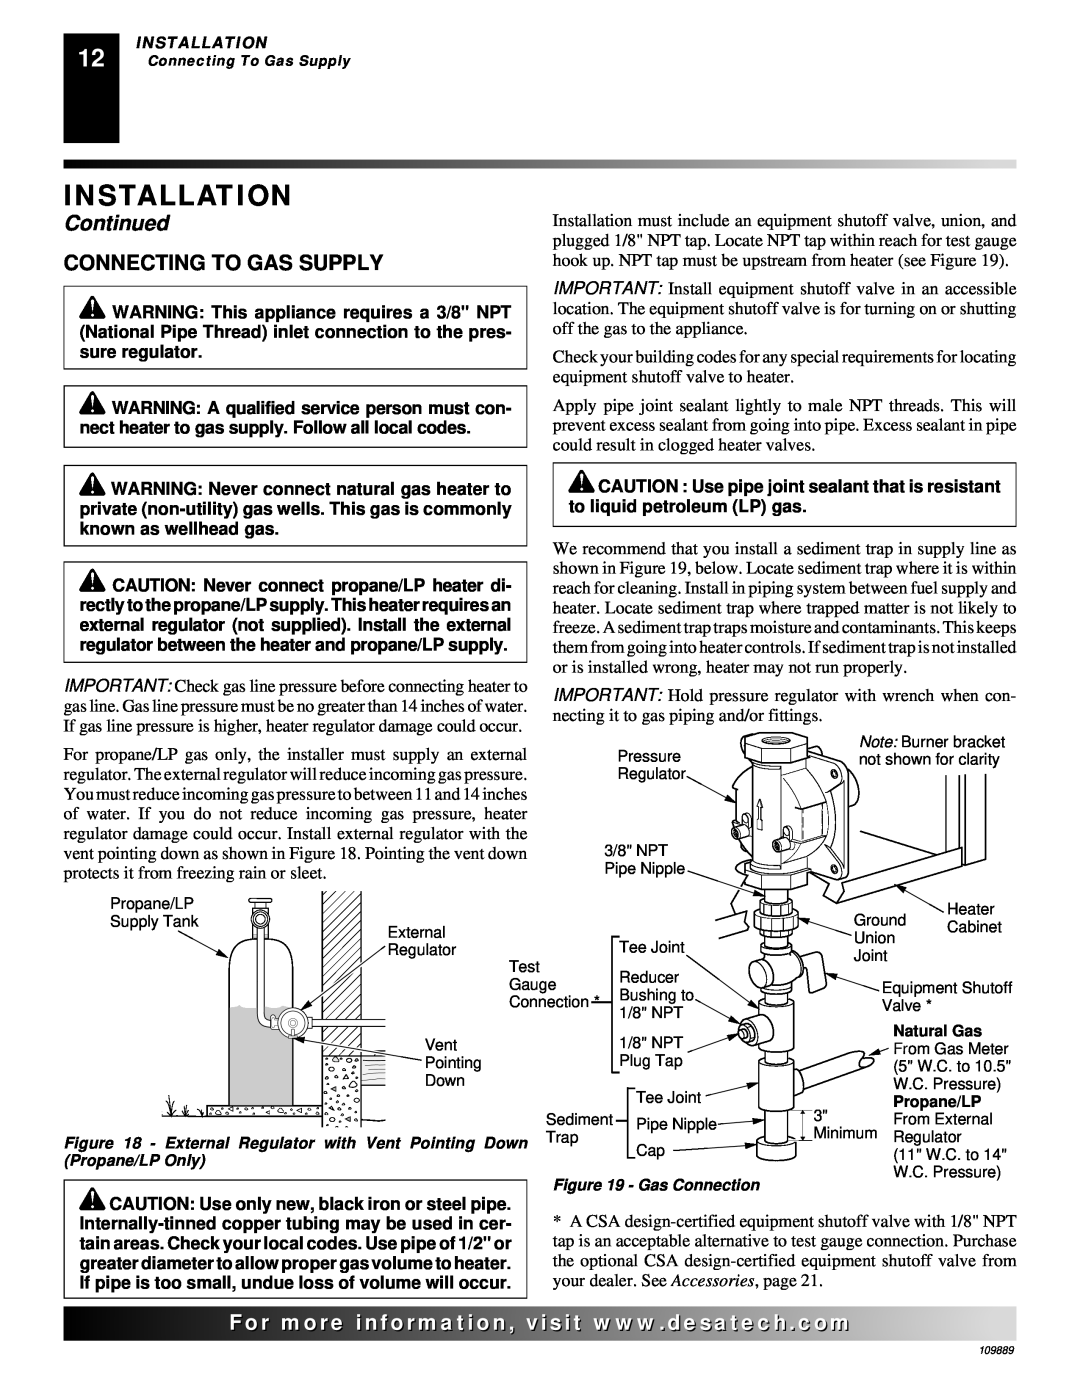 Desa VMH3000TPA installation manual Connecting To Gas Supply, Installation, Continued 